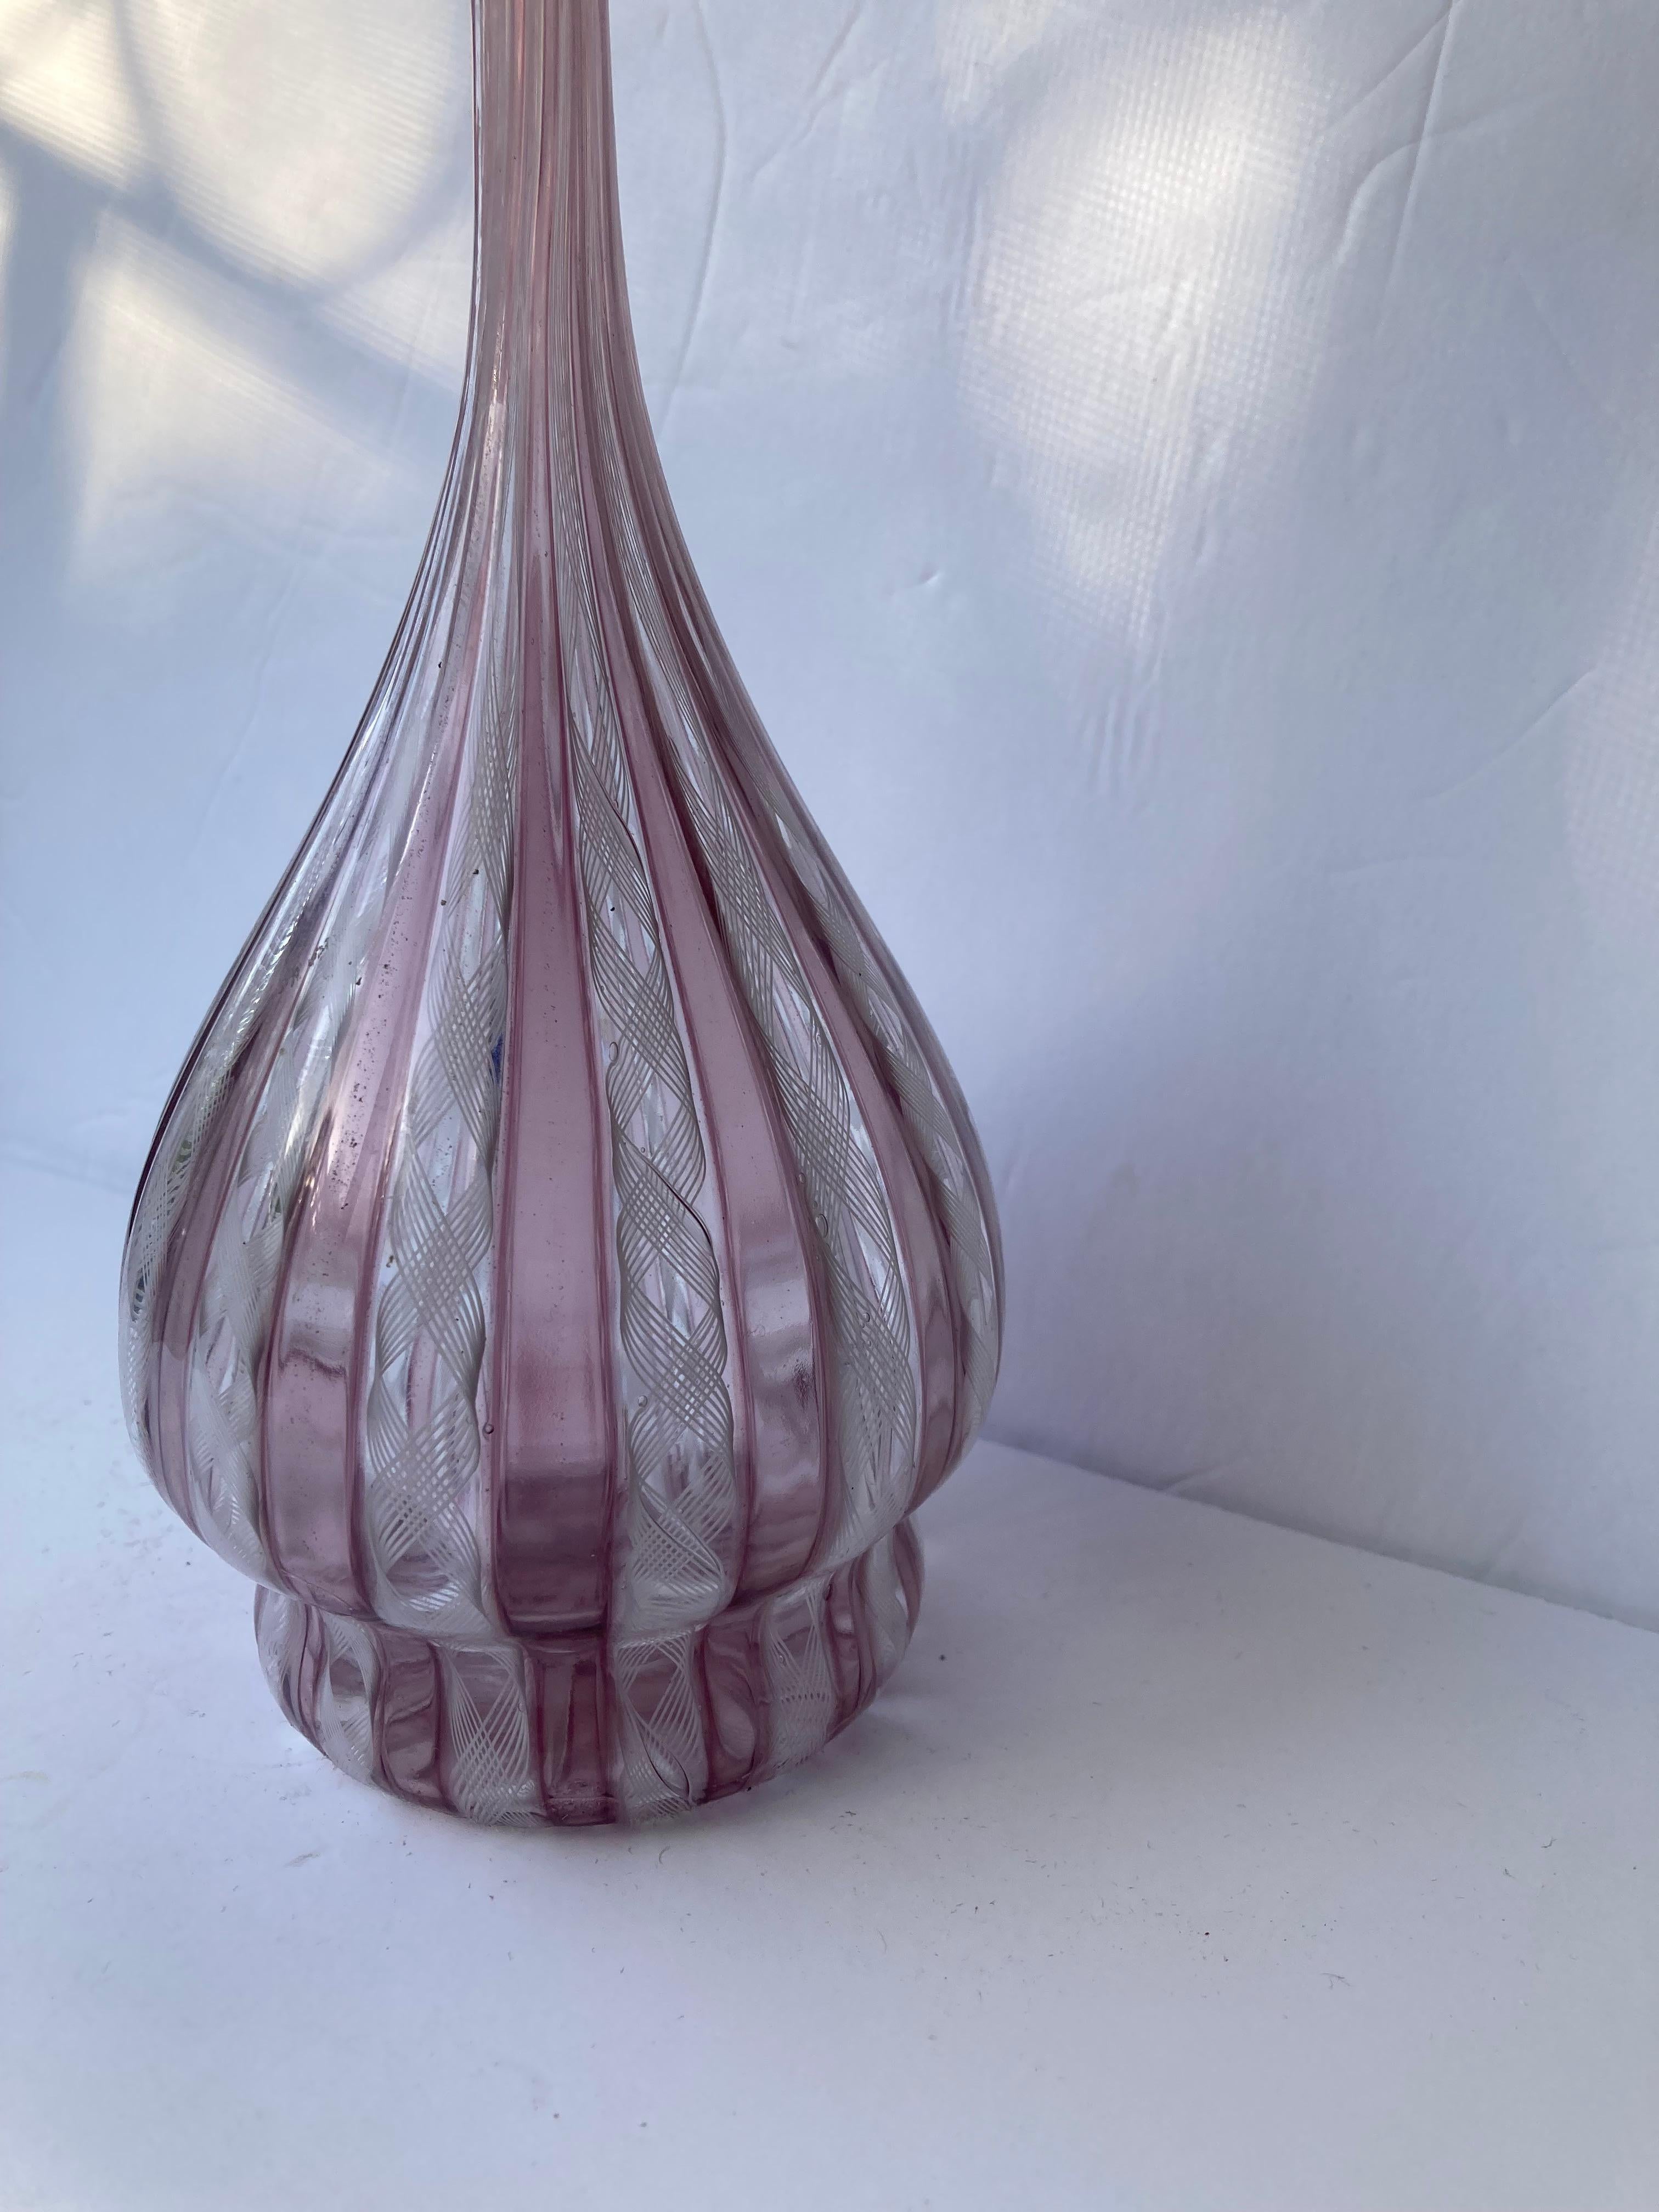 Beautiful Venini vase in this canes twisted work, zanfirico technic that makes lattice patterns . This vase has a neck shape and is signed in bottom diamond point 